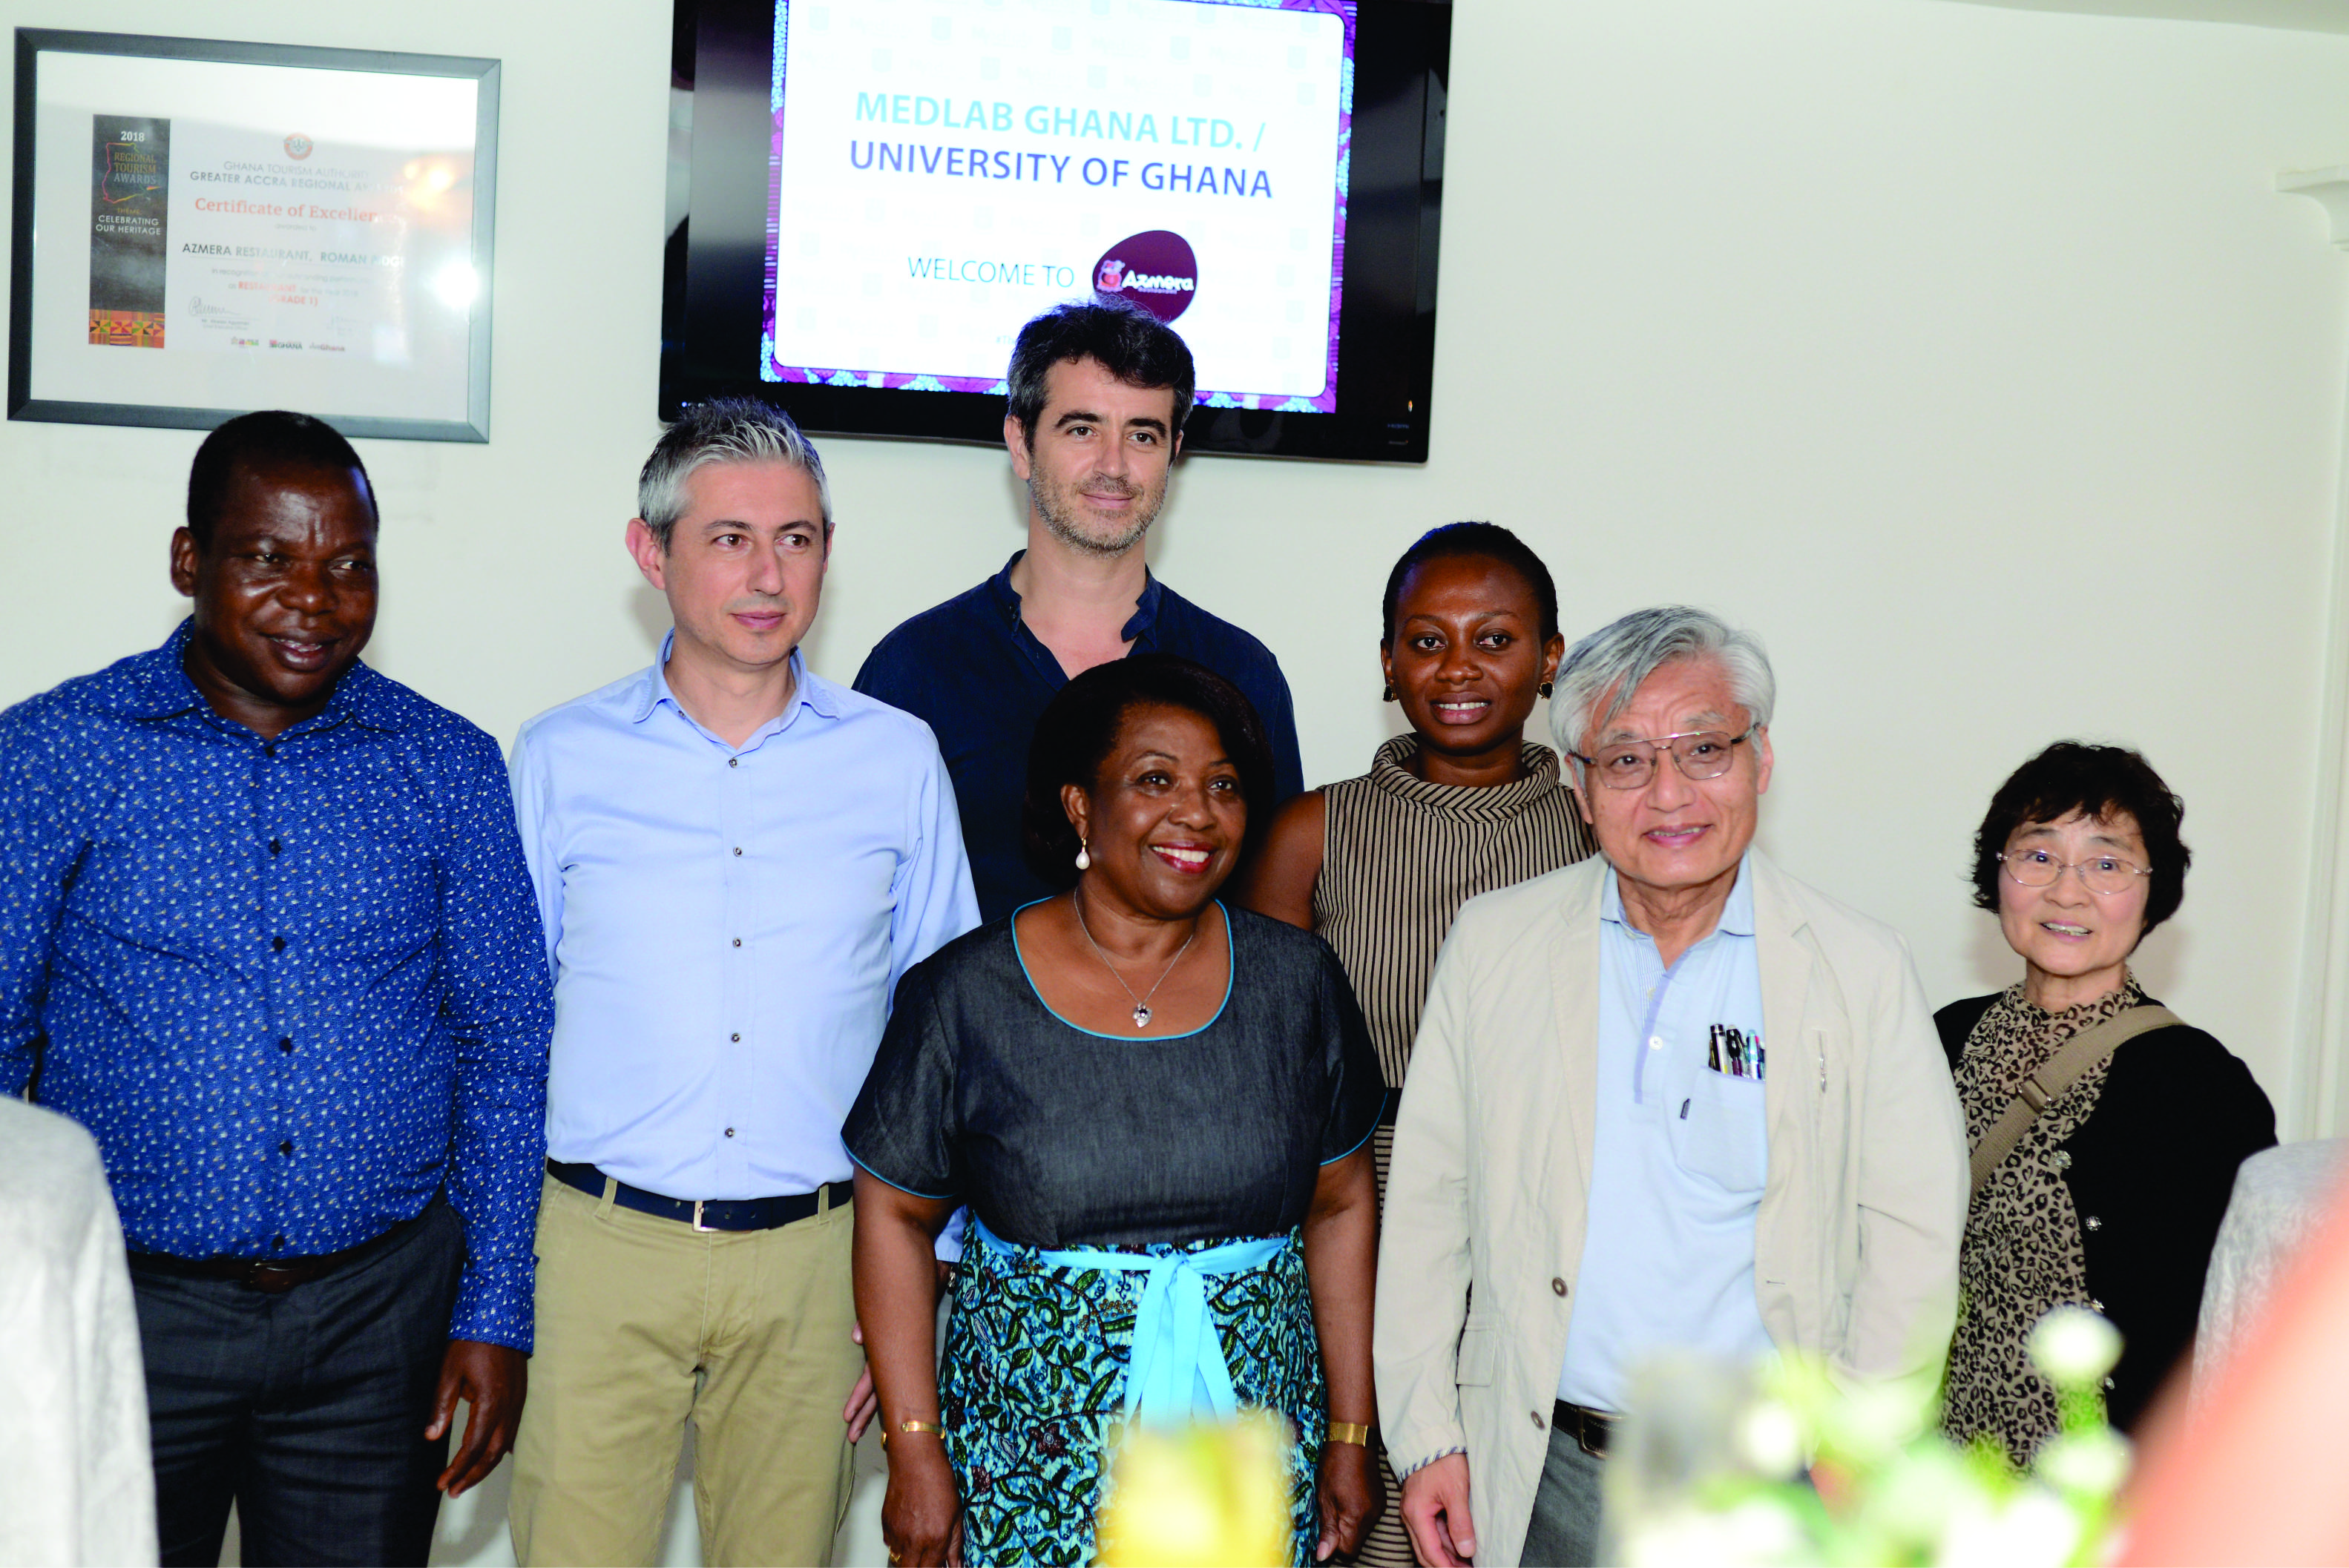 Dr. Rosemary Keatley with Prof. Ichihara and other guests from Snylab and the University of Ghana.